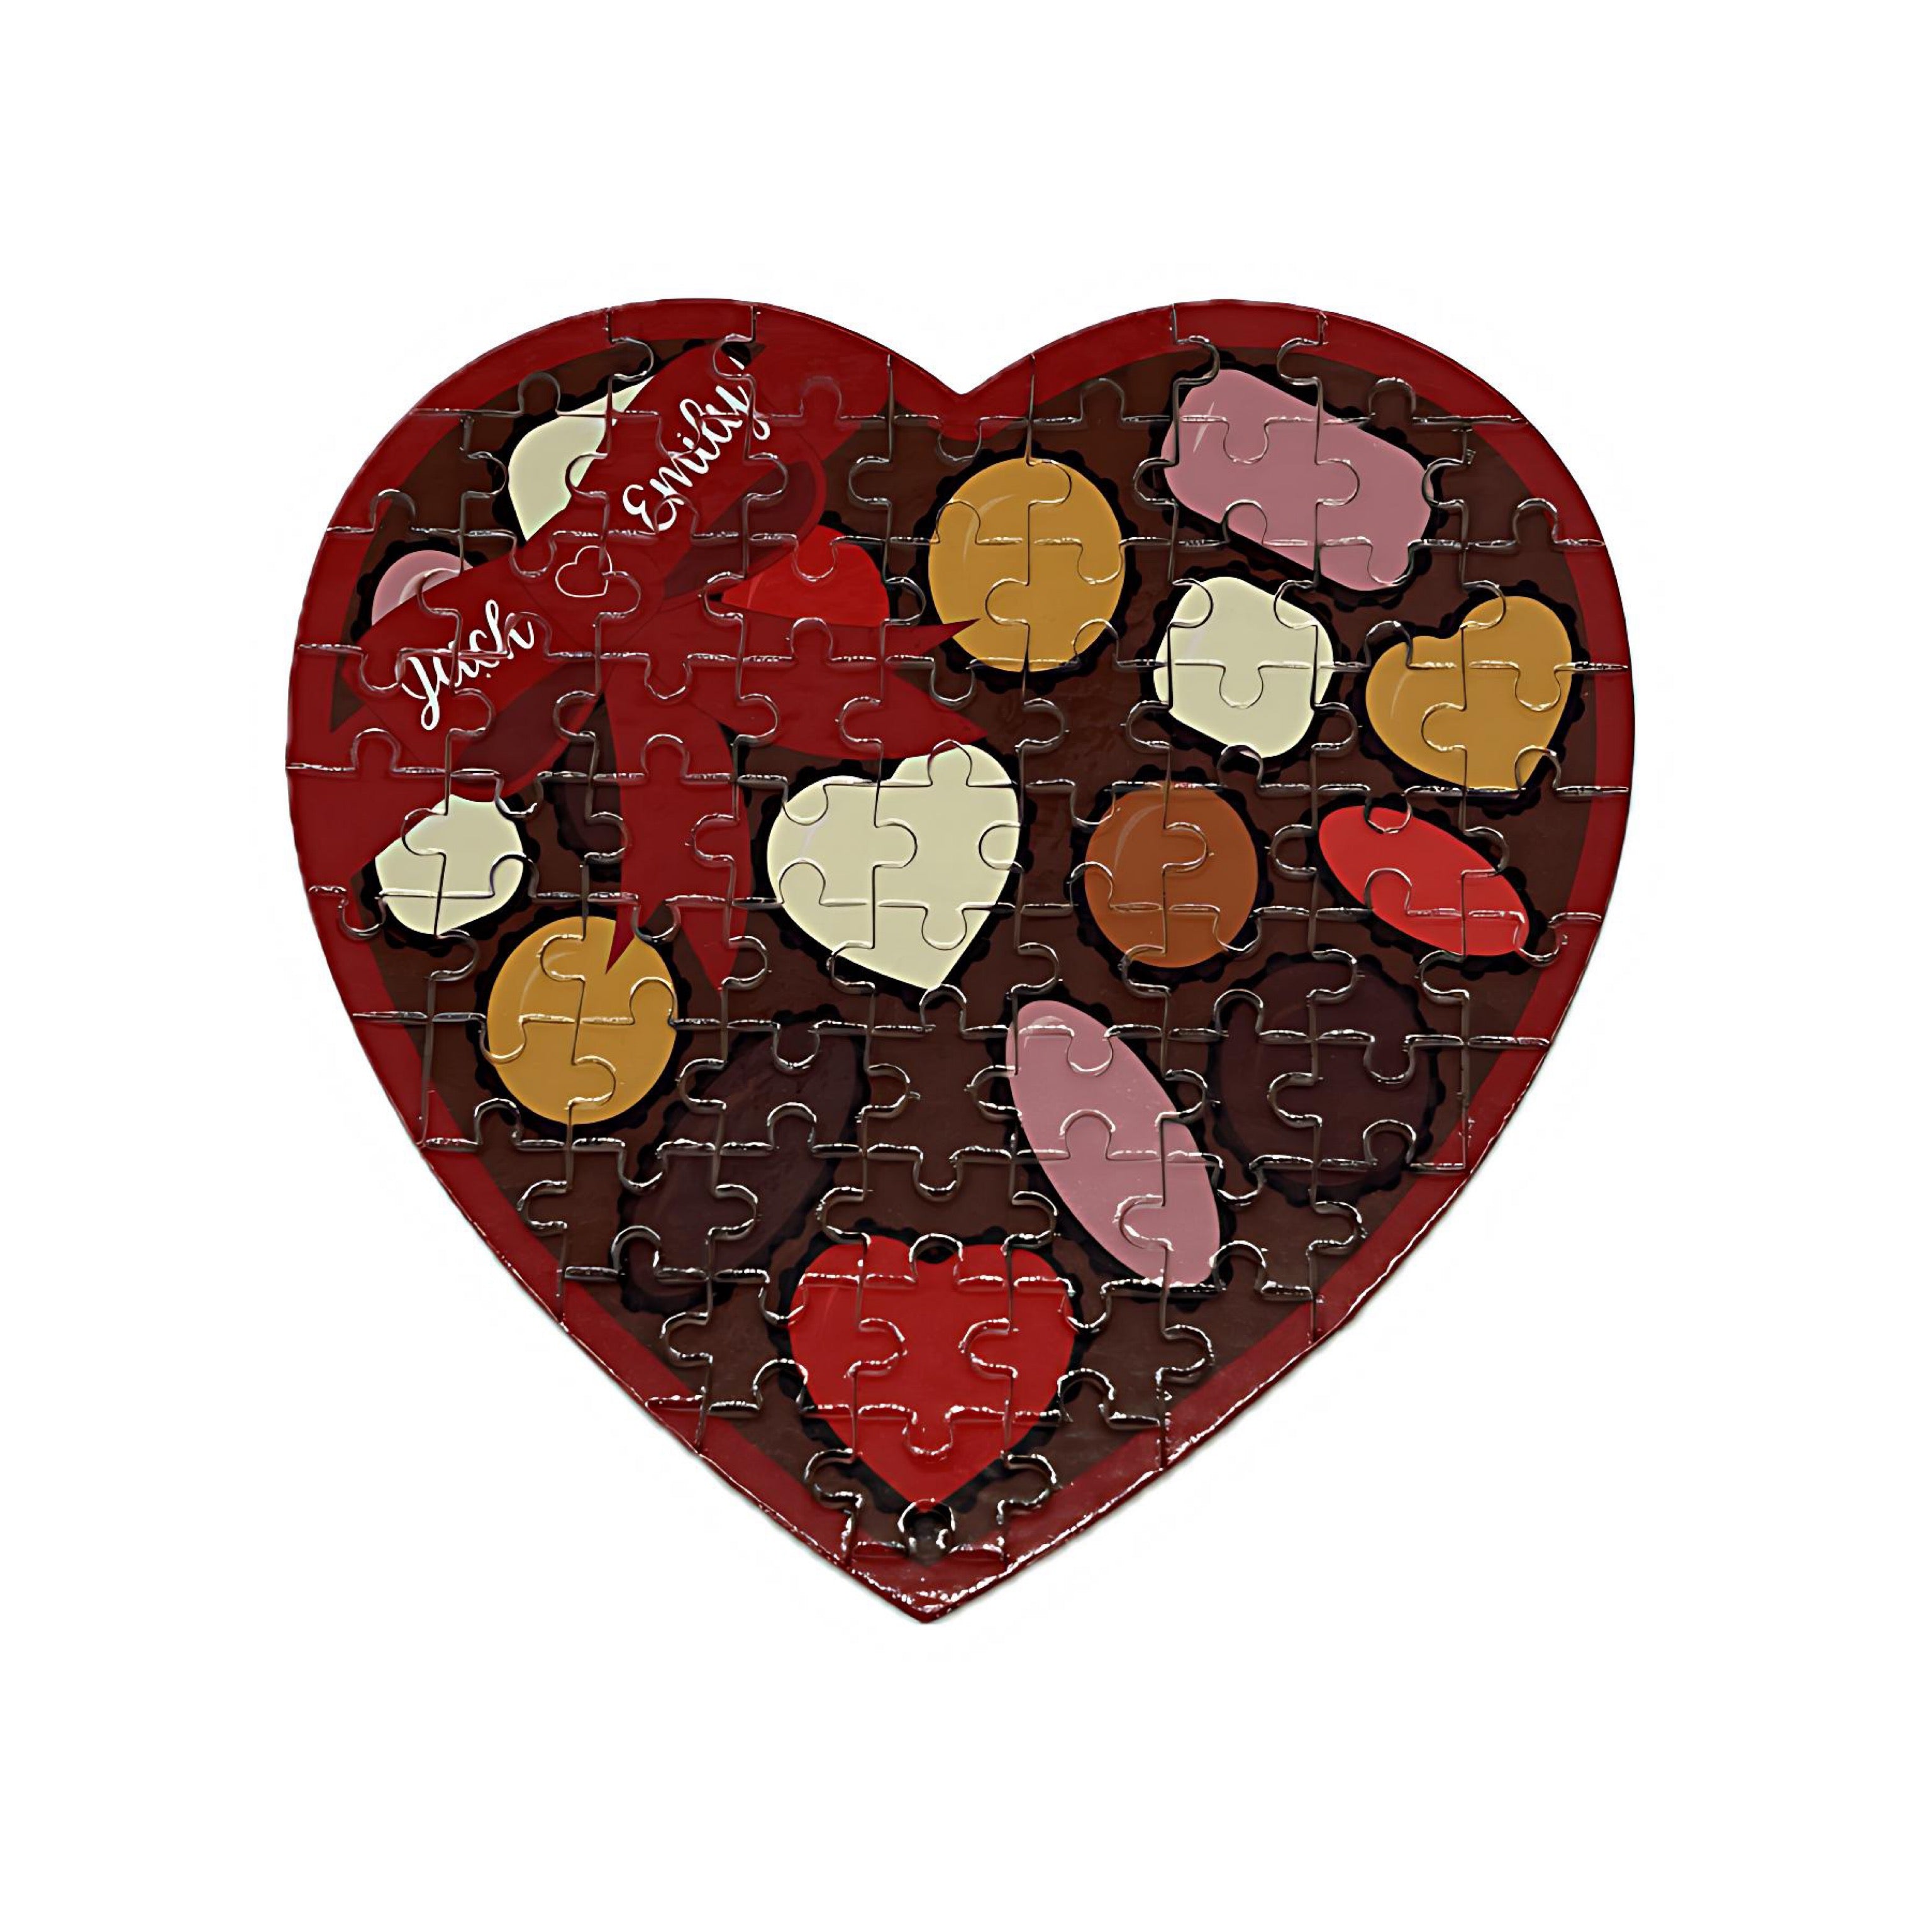 Personalized Heart-Shaped Puzzle